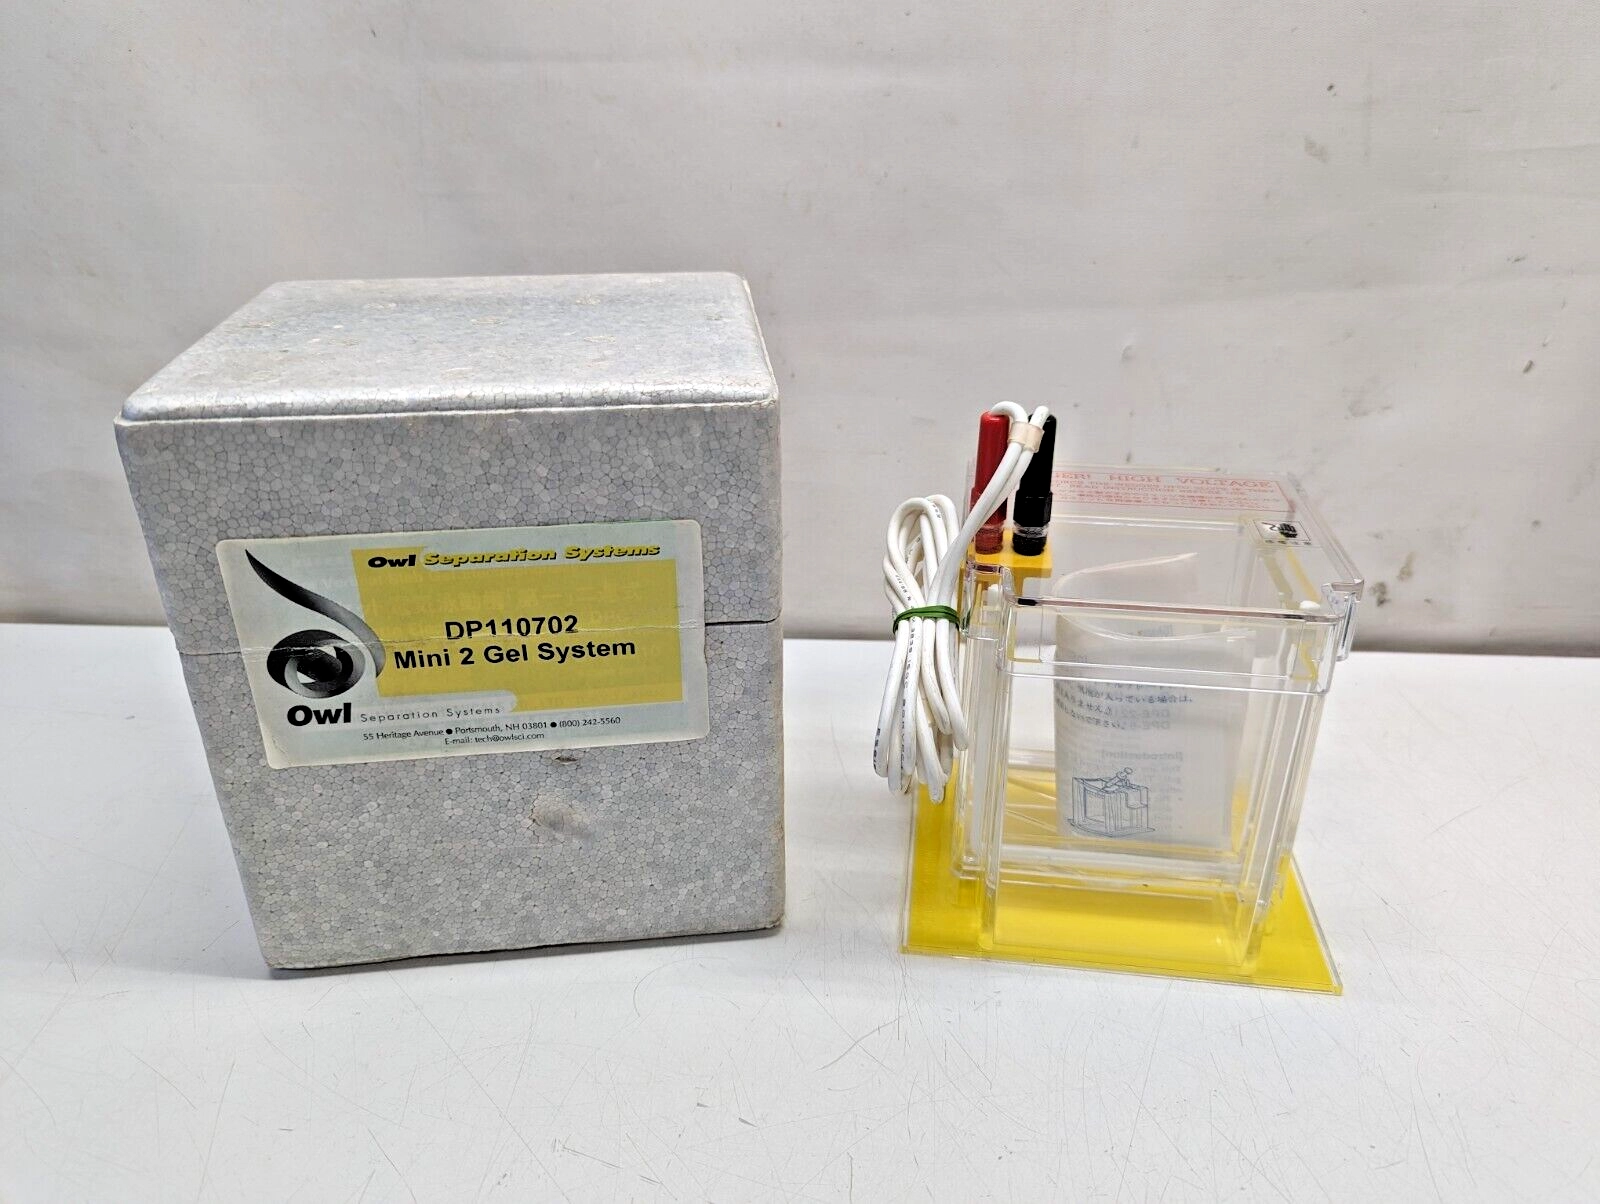 New: Owl Seperation Systems Mini 2 Gel Electrophor